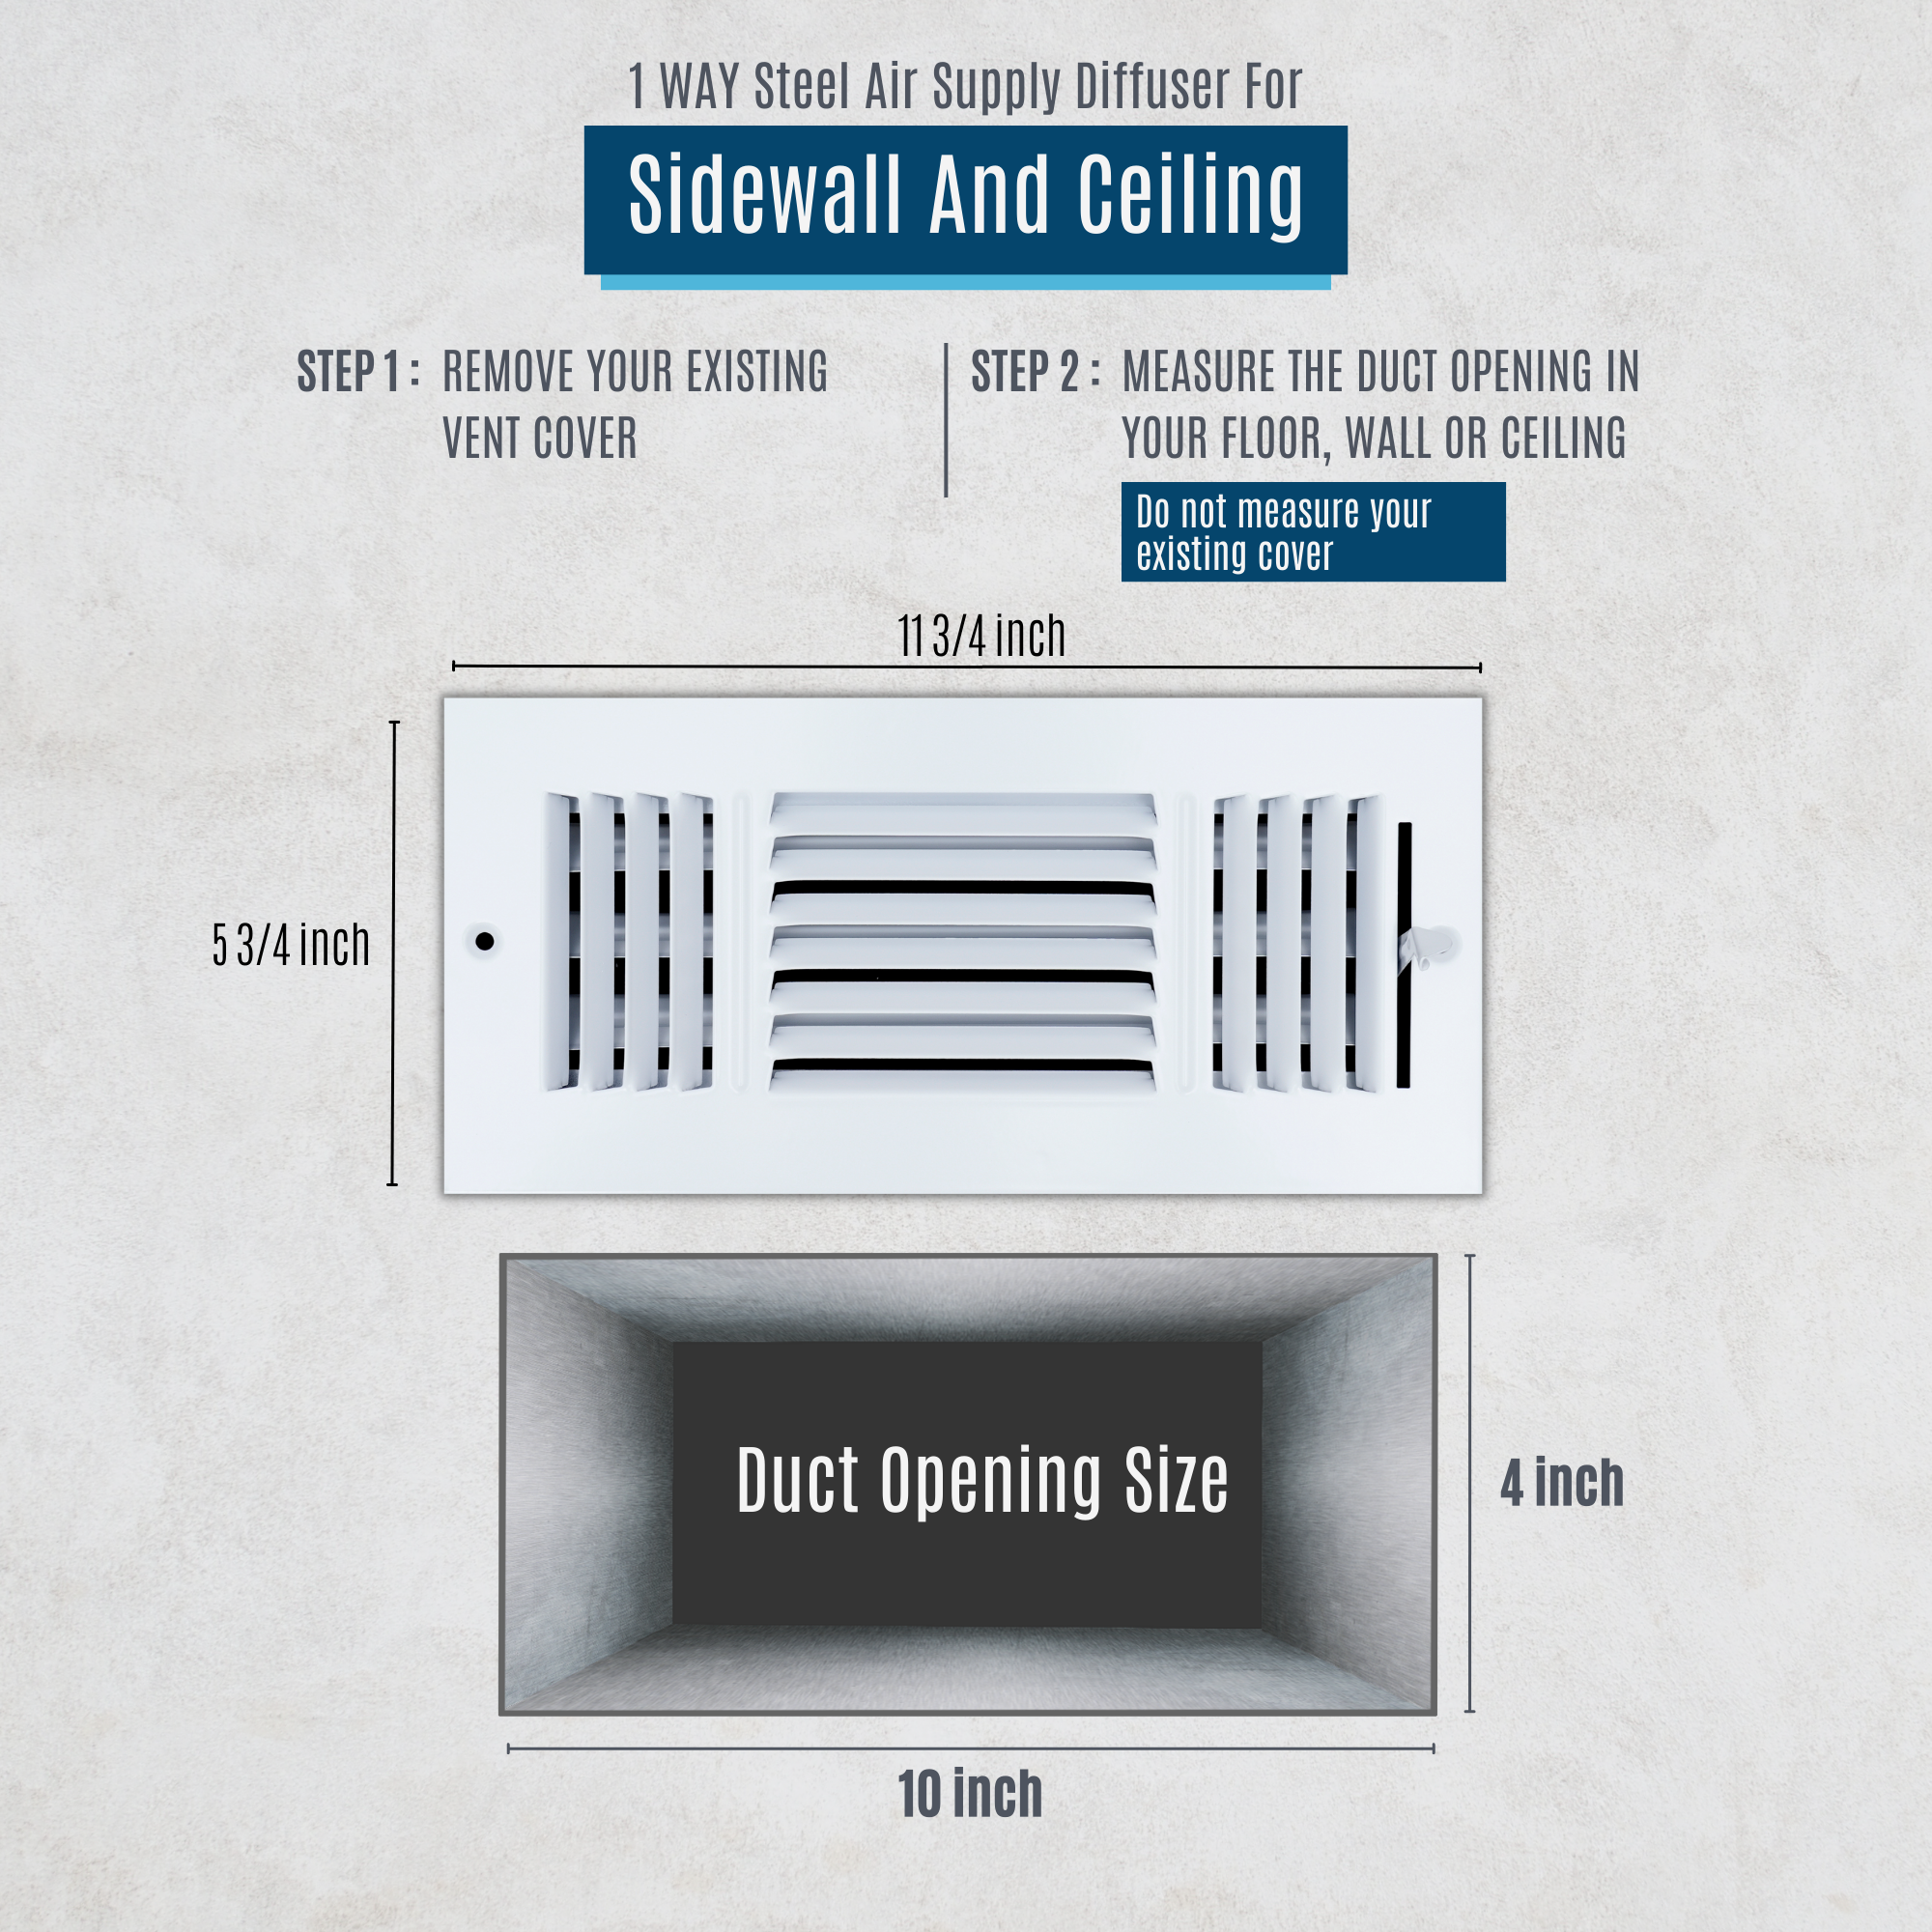 10 X 4 Duct Opening | 3 WAY Steel Air Supply Diffuser for Sidewall and Ceiling